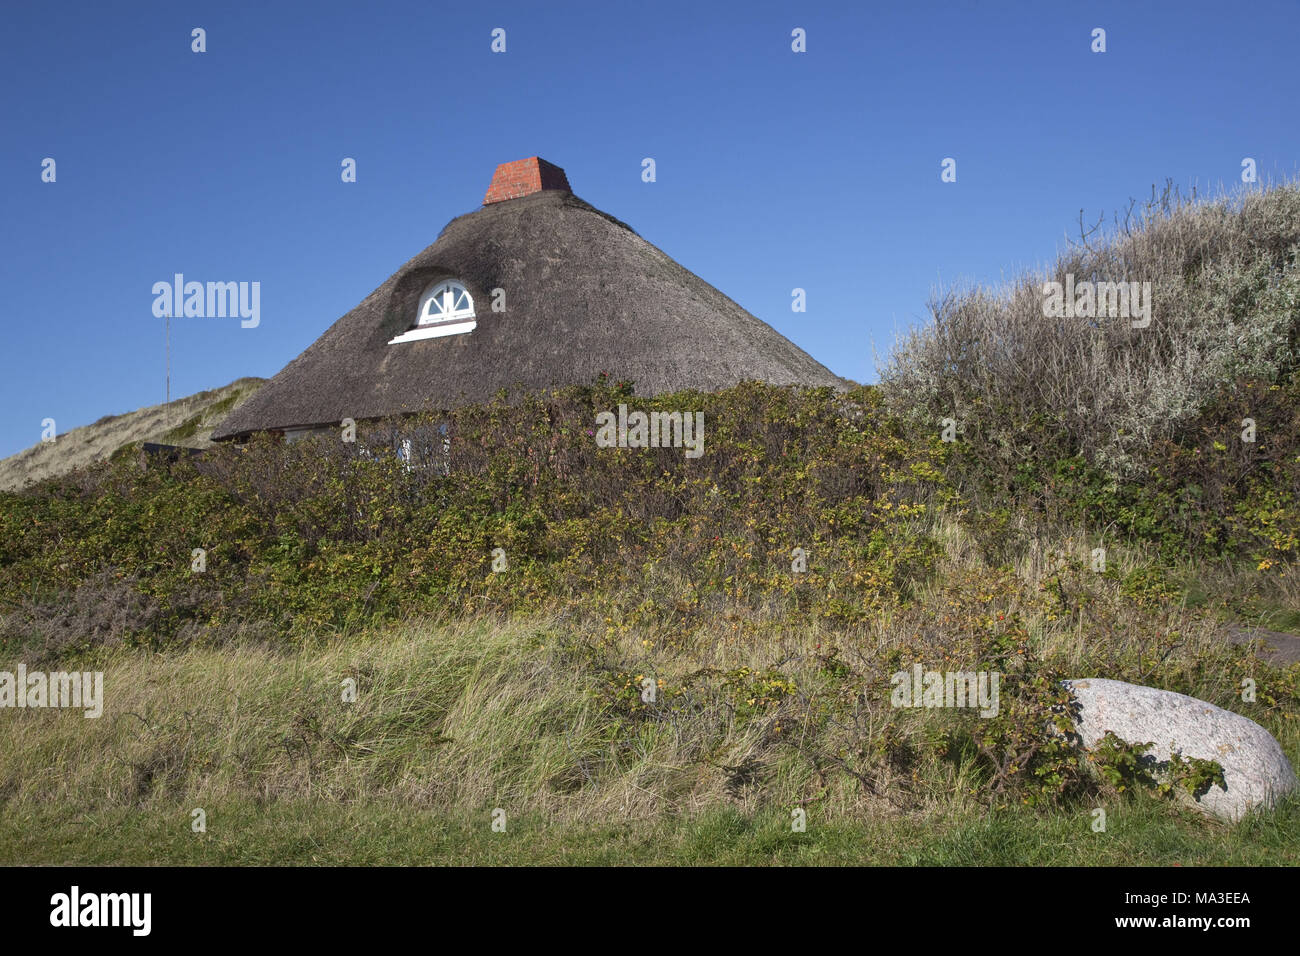 Thatched-roof house in Hörnum, island Sylt, Schleswig - Holstein, Germany, Stock Photo